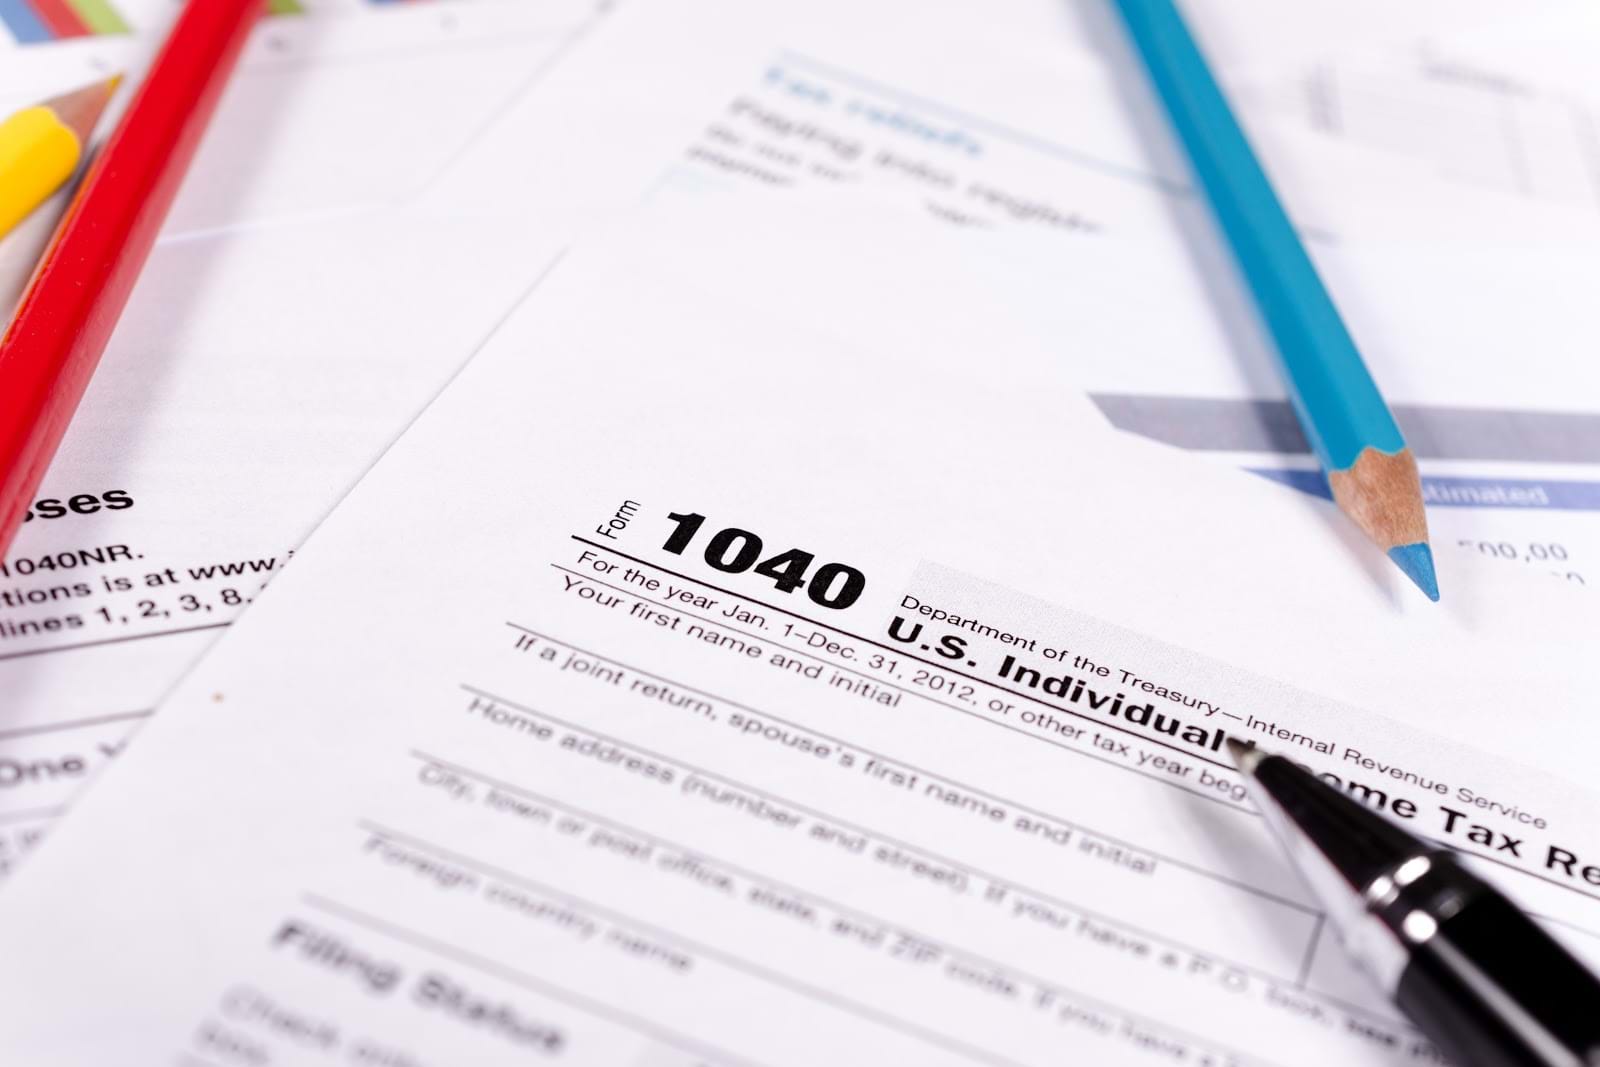 Common Tax Filing Mistakes